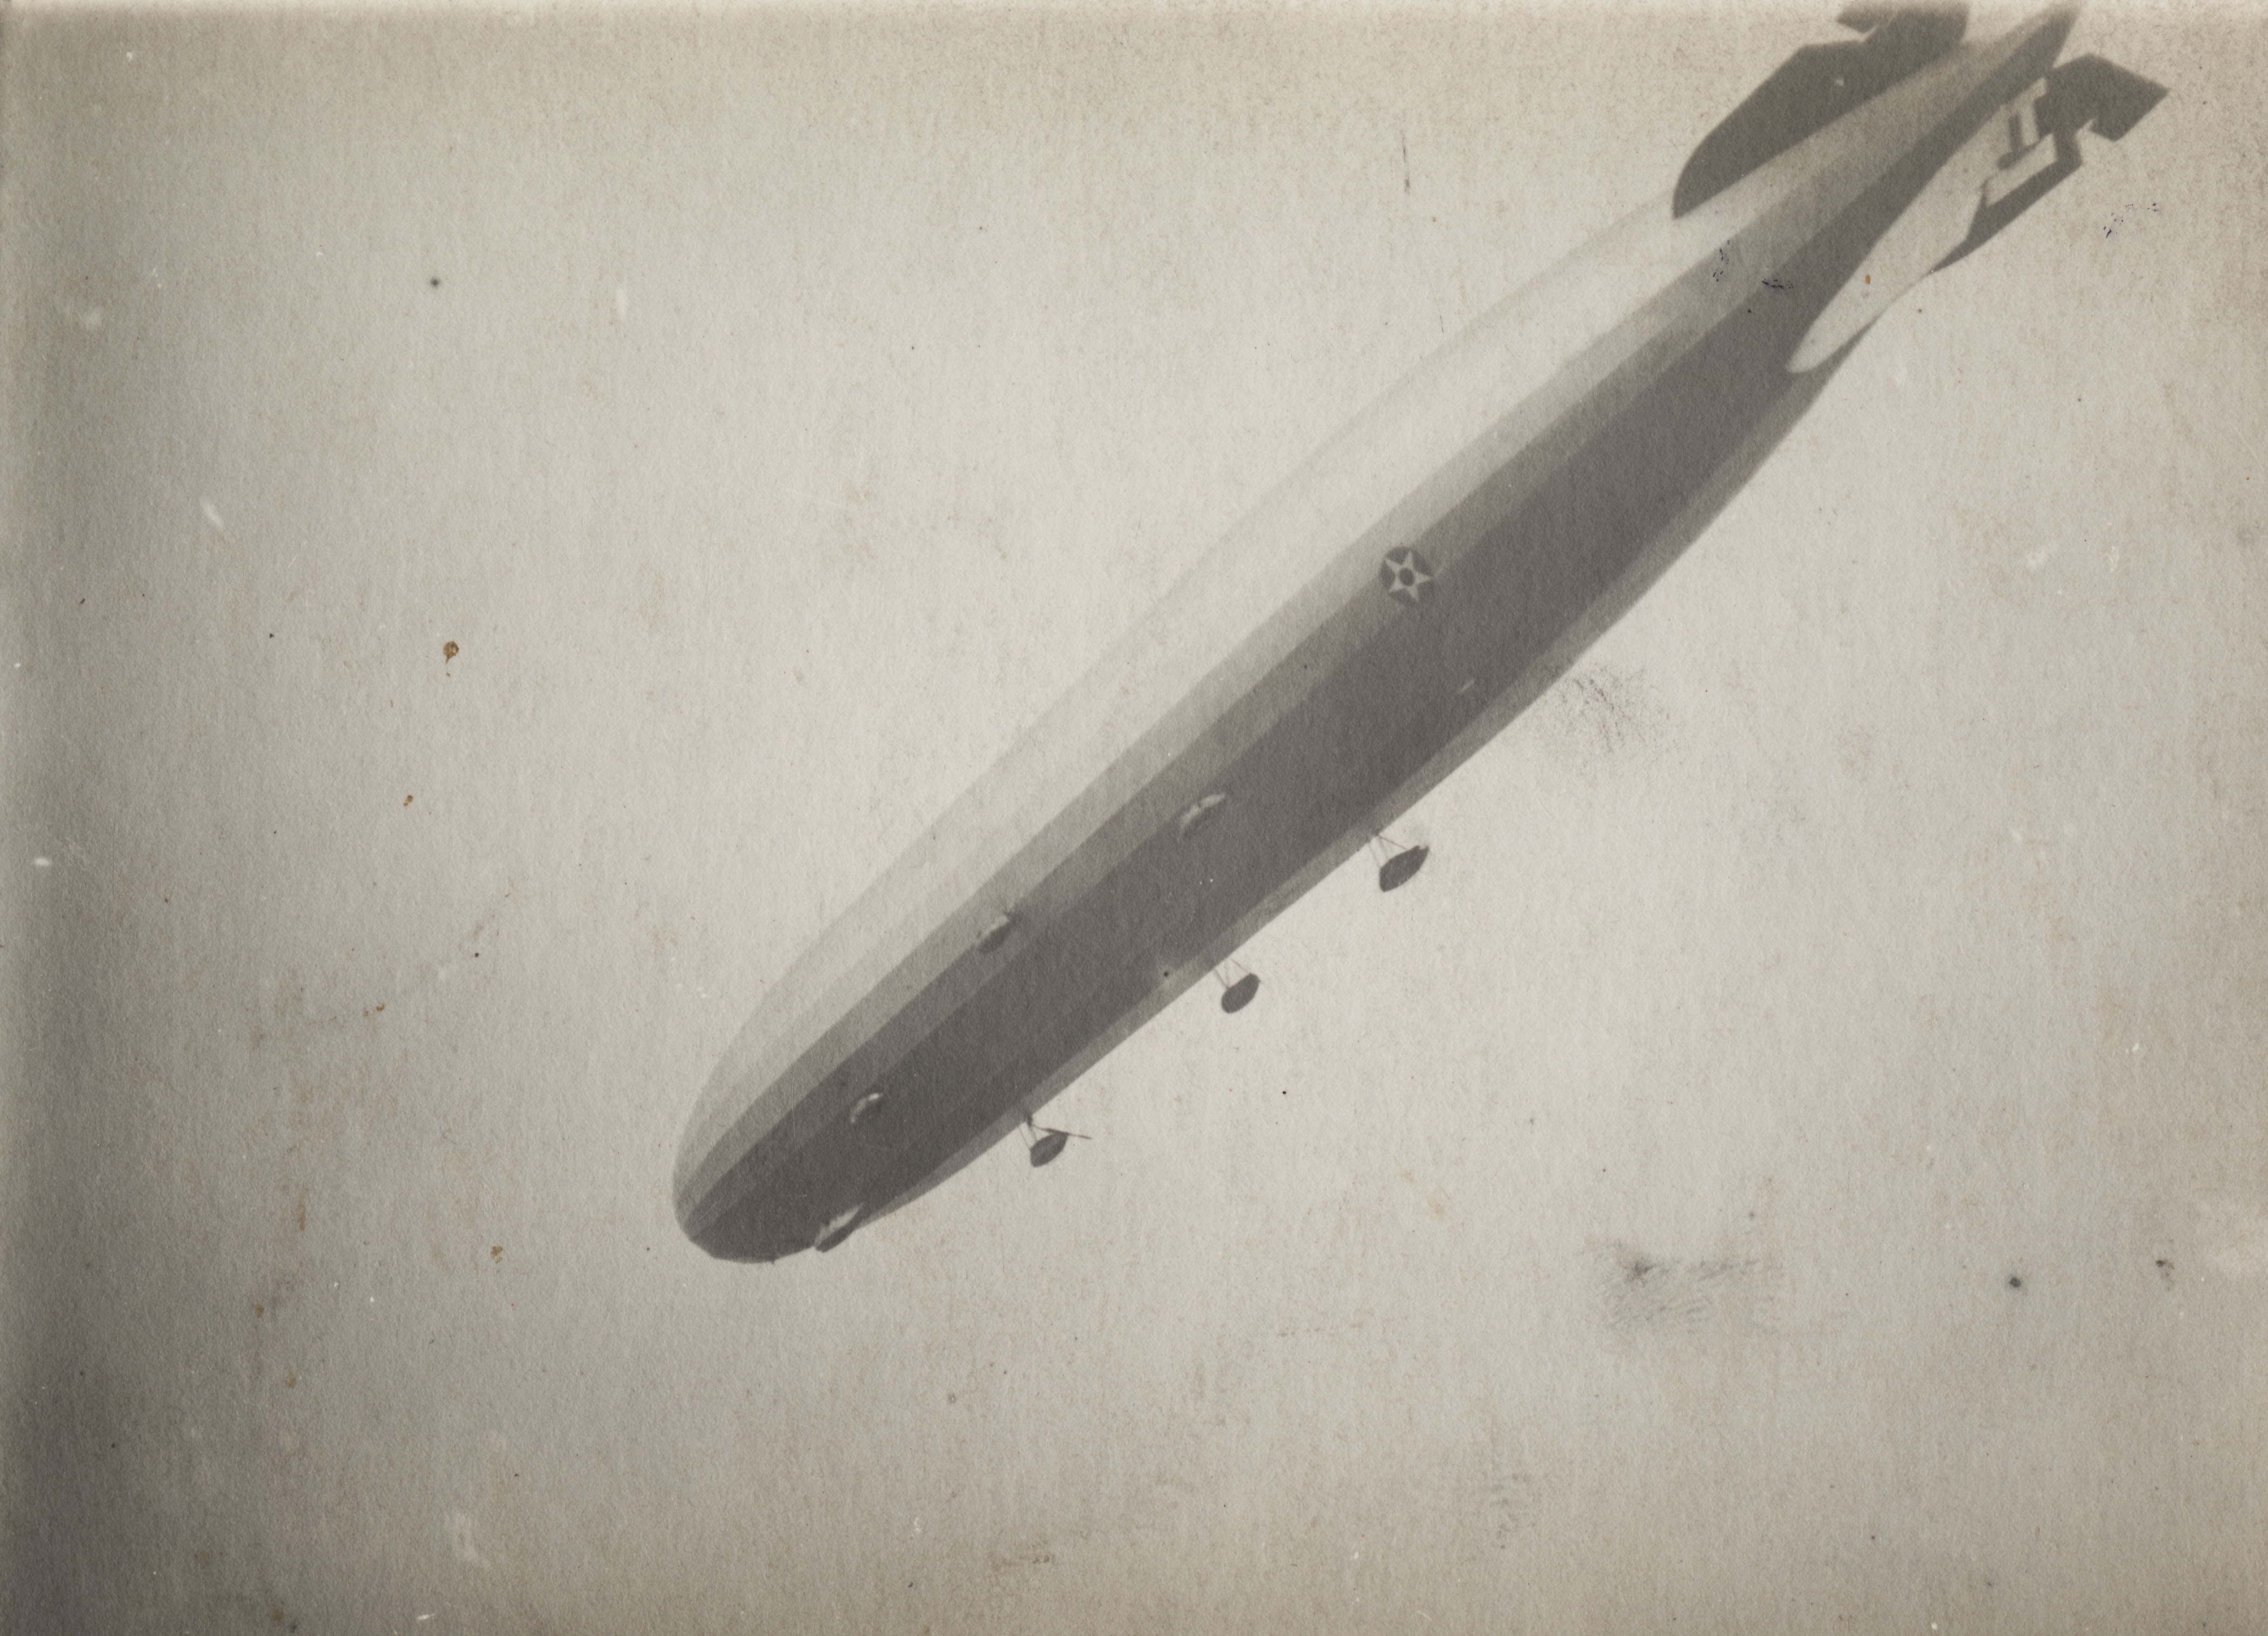 Black and white image of airship R.38/ZR2 in flight.